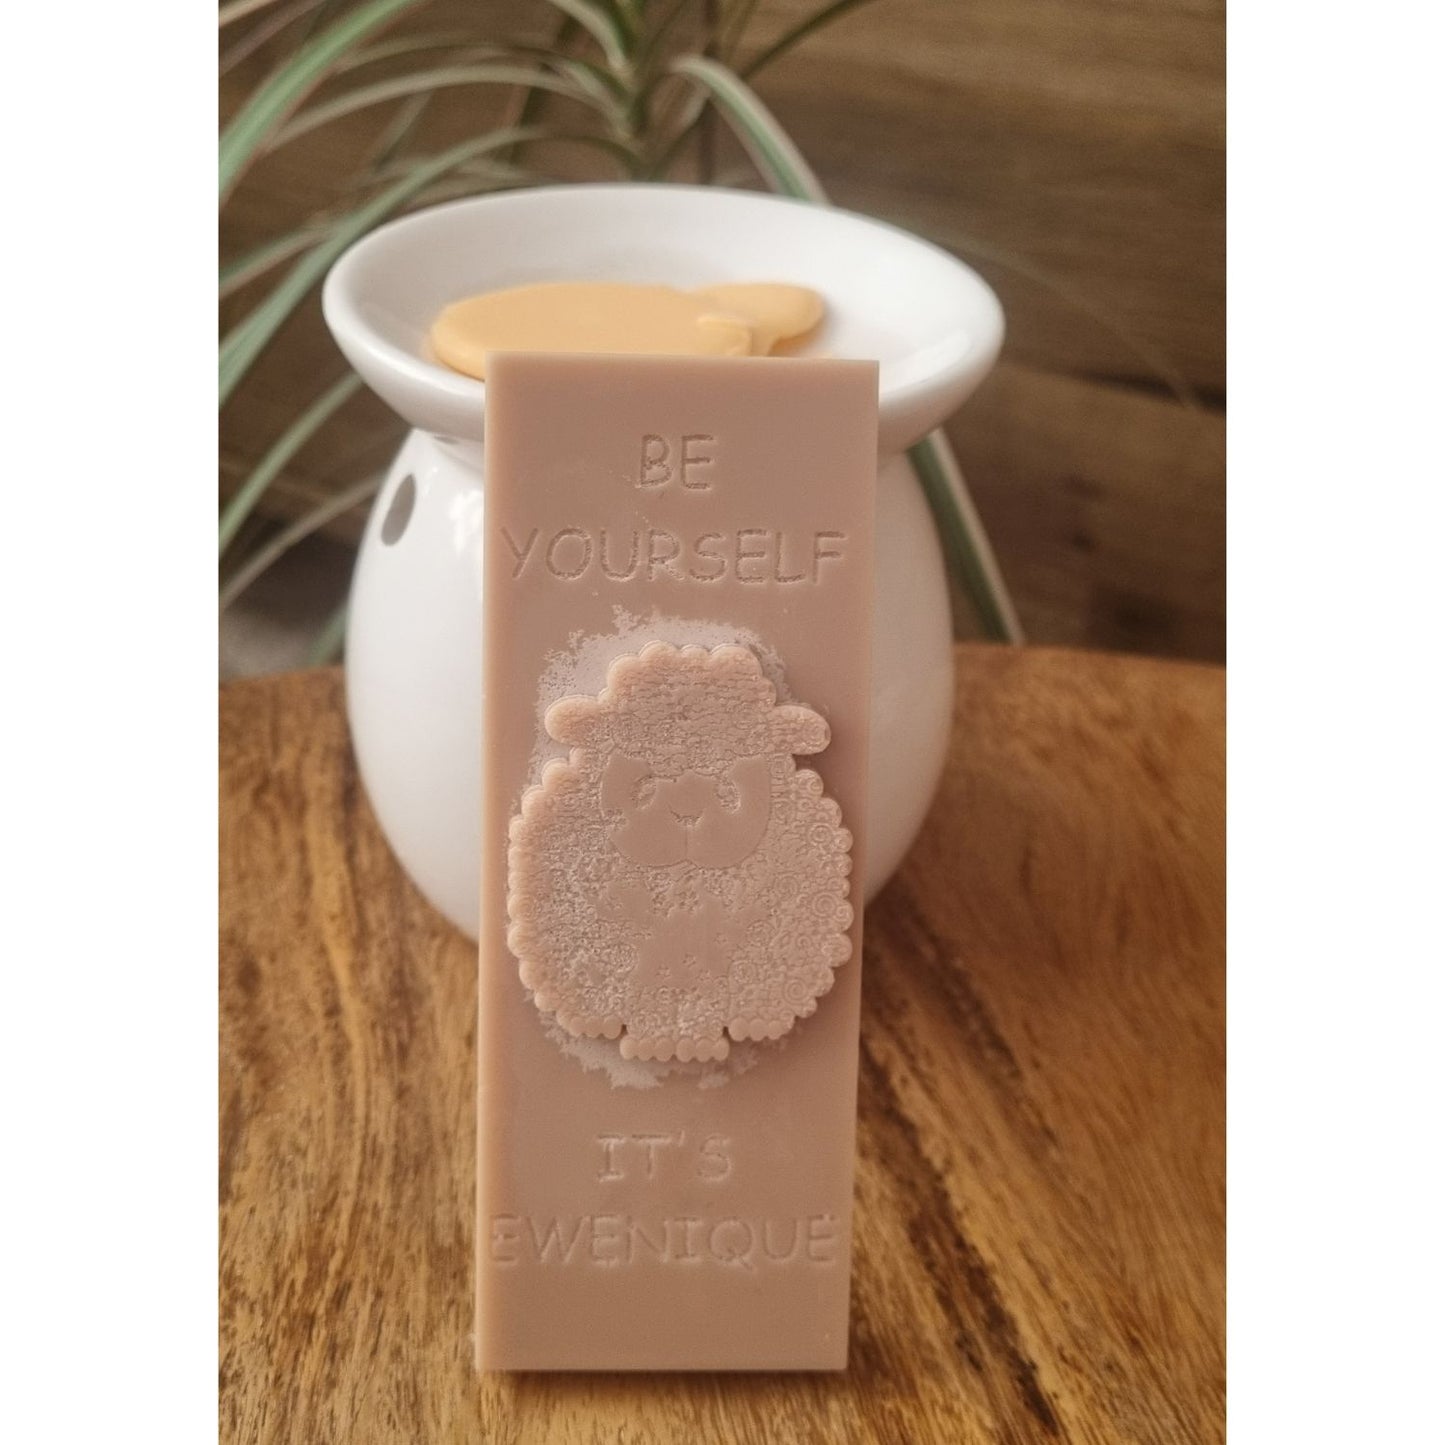 A brown coloured wax melt bar with a raised sheep design with the writing be yourself above and it's ewenique below next to a wax warmer